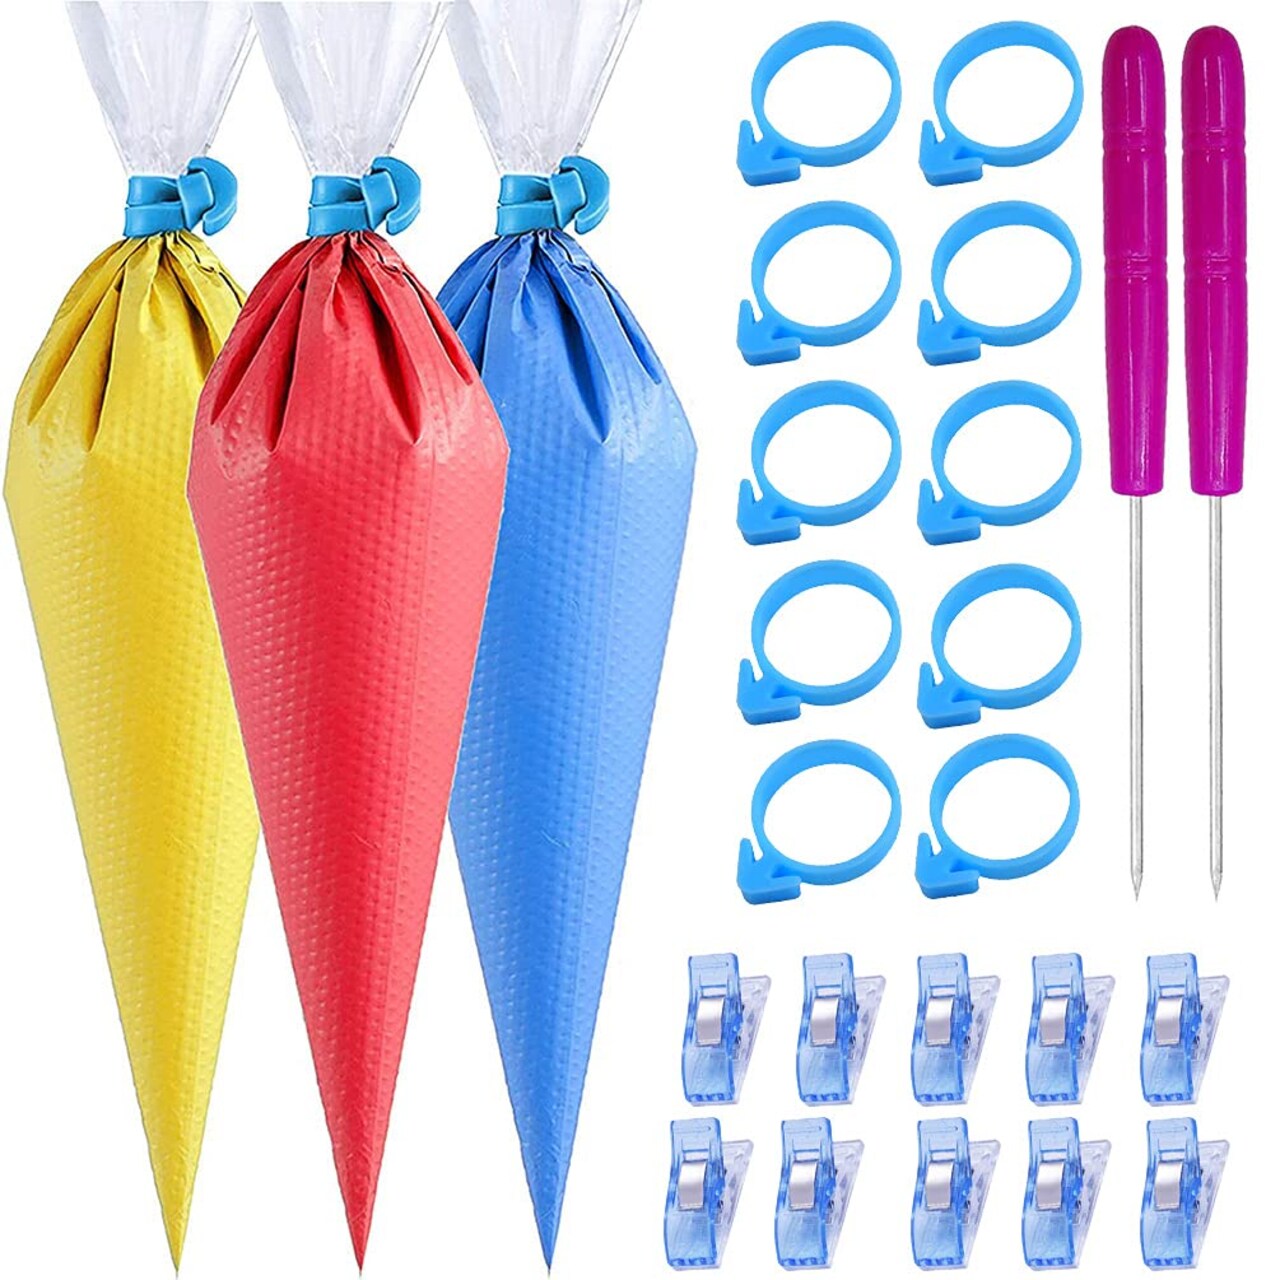 122Pieces Tipless Piping Bags - 100pcs Disposable Piping Pastry